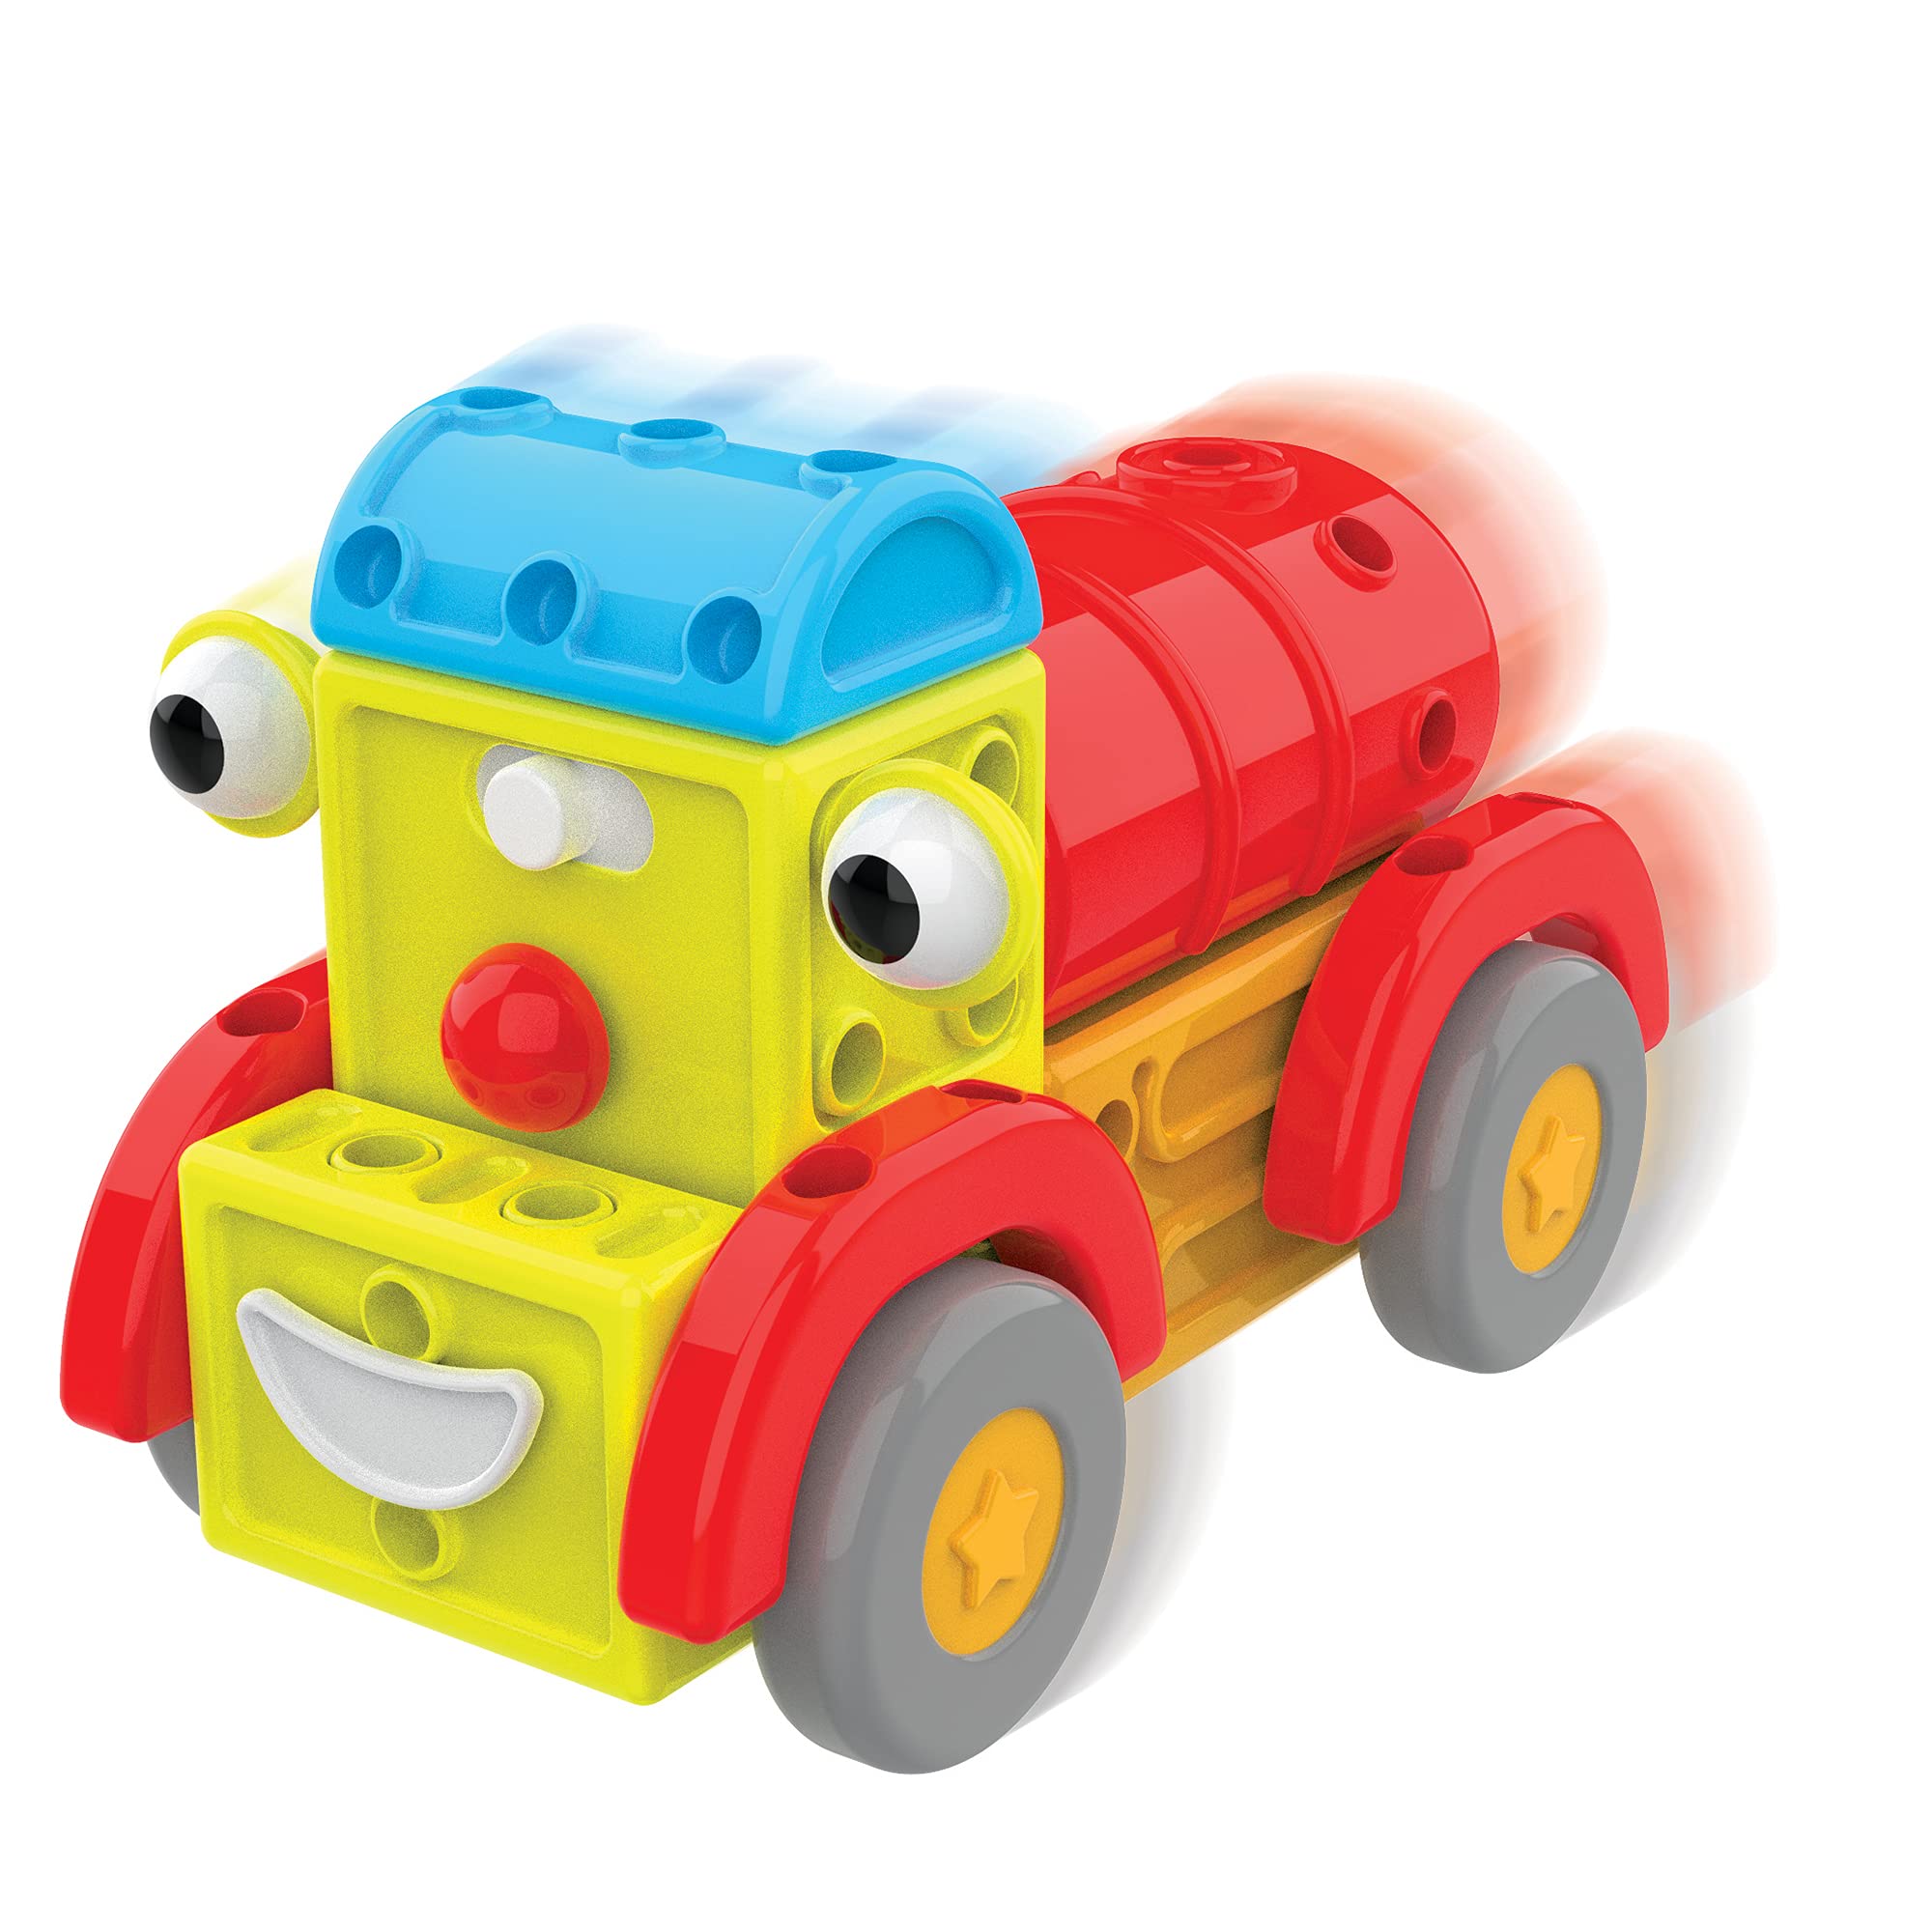 The Learning Journey: Techno Kids 4-in-1 Around Town - Kids Moblie Vehicles Construction Combo Set - Interlocking - Interchangeable STEM Toy Gear Sets for Children Preschool- Ages 3 Years and Up